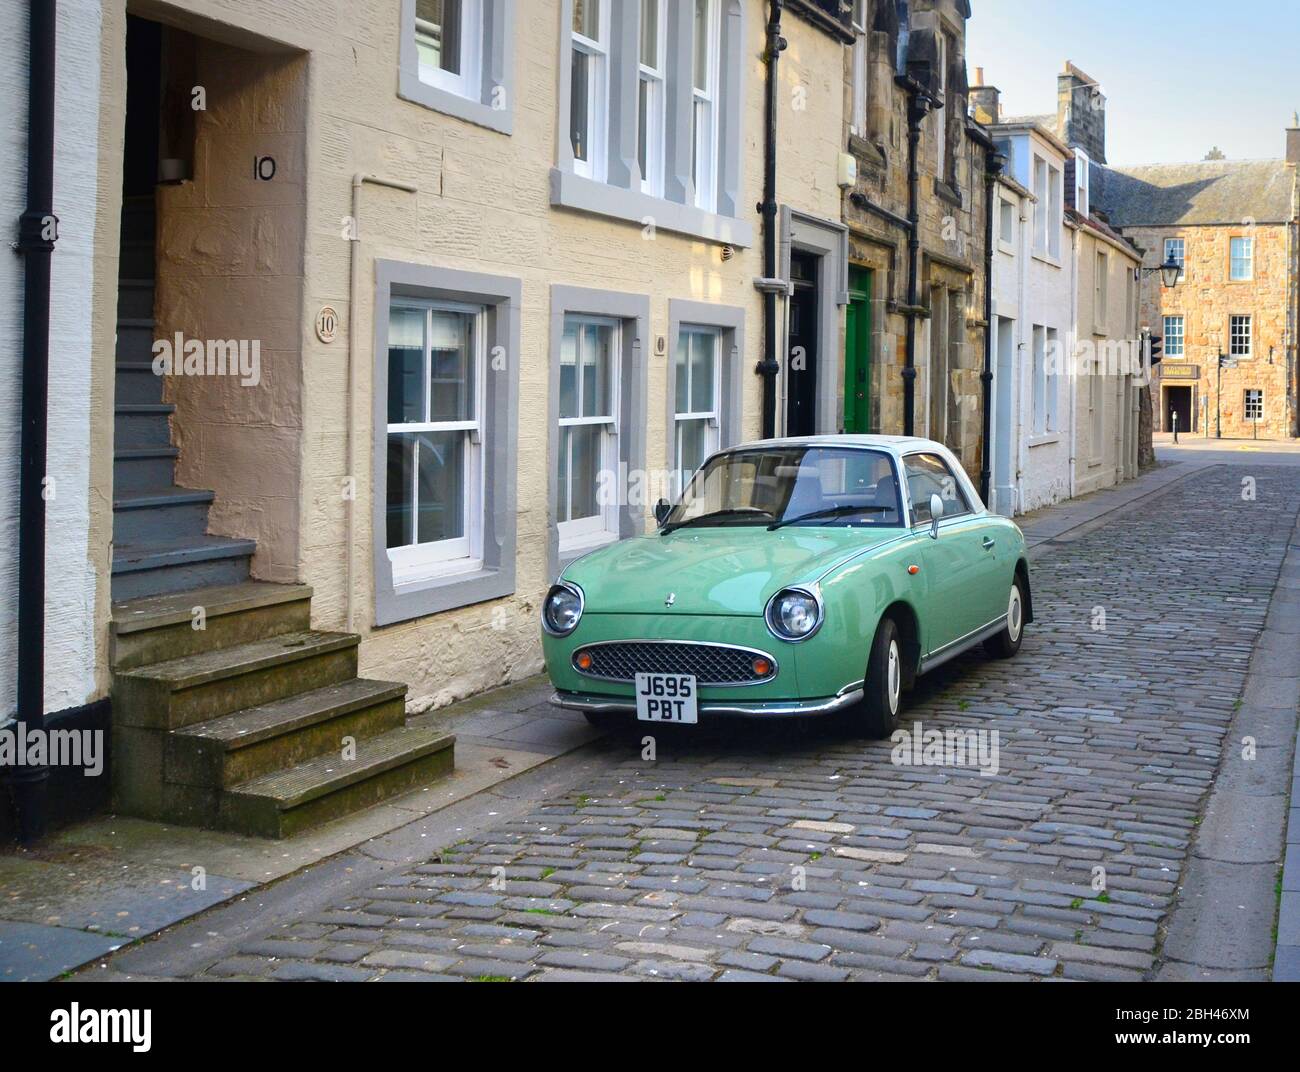 the retro 1960's looking car, the  Nissan Figaro parked on a cobbled street in the old town of St andrews, fife, Scotland Stock Photo